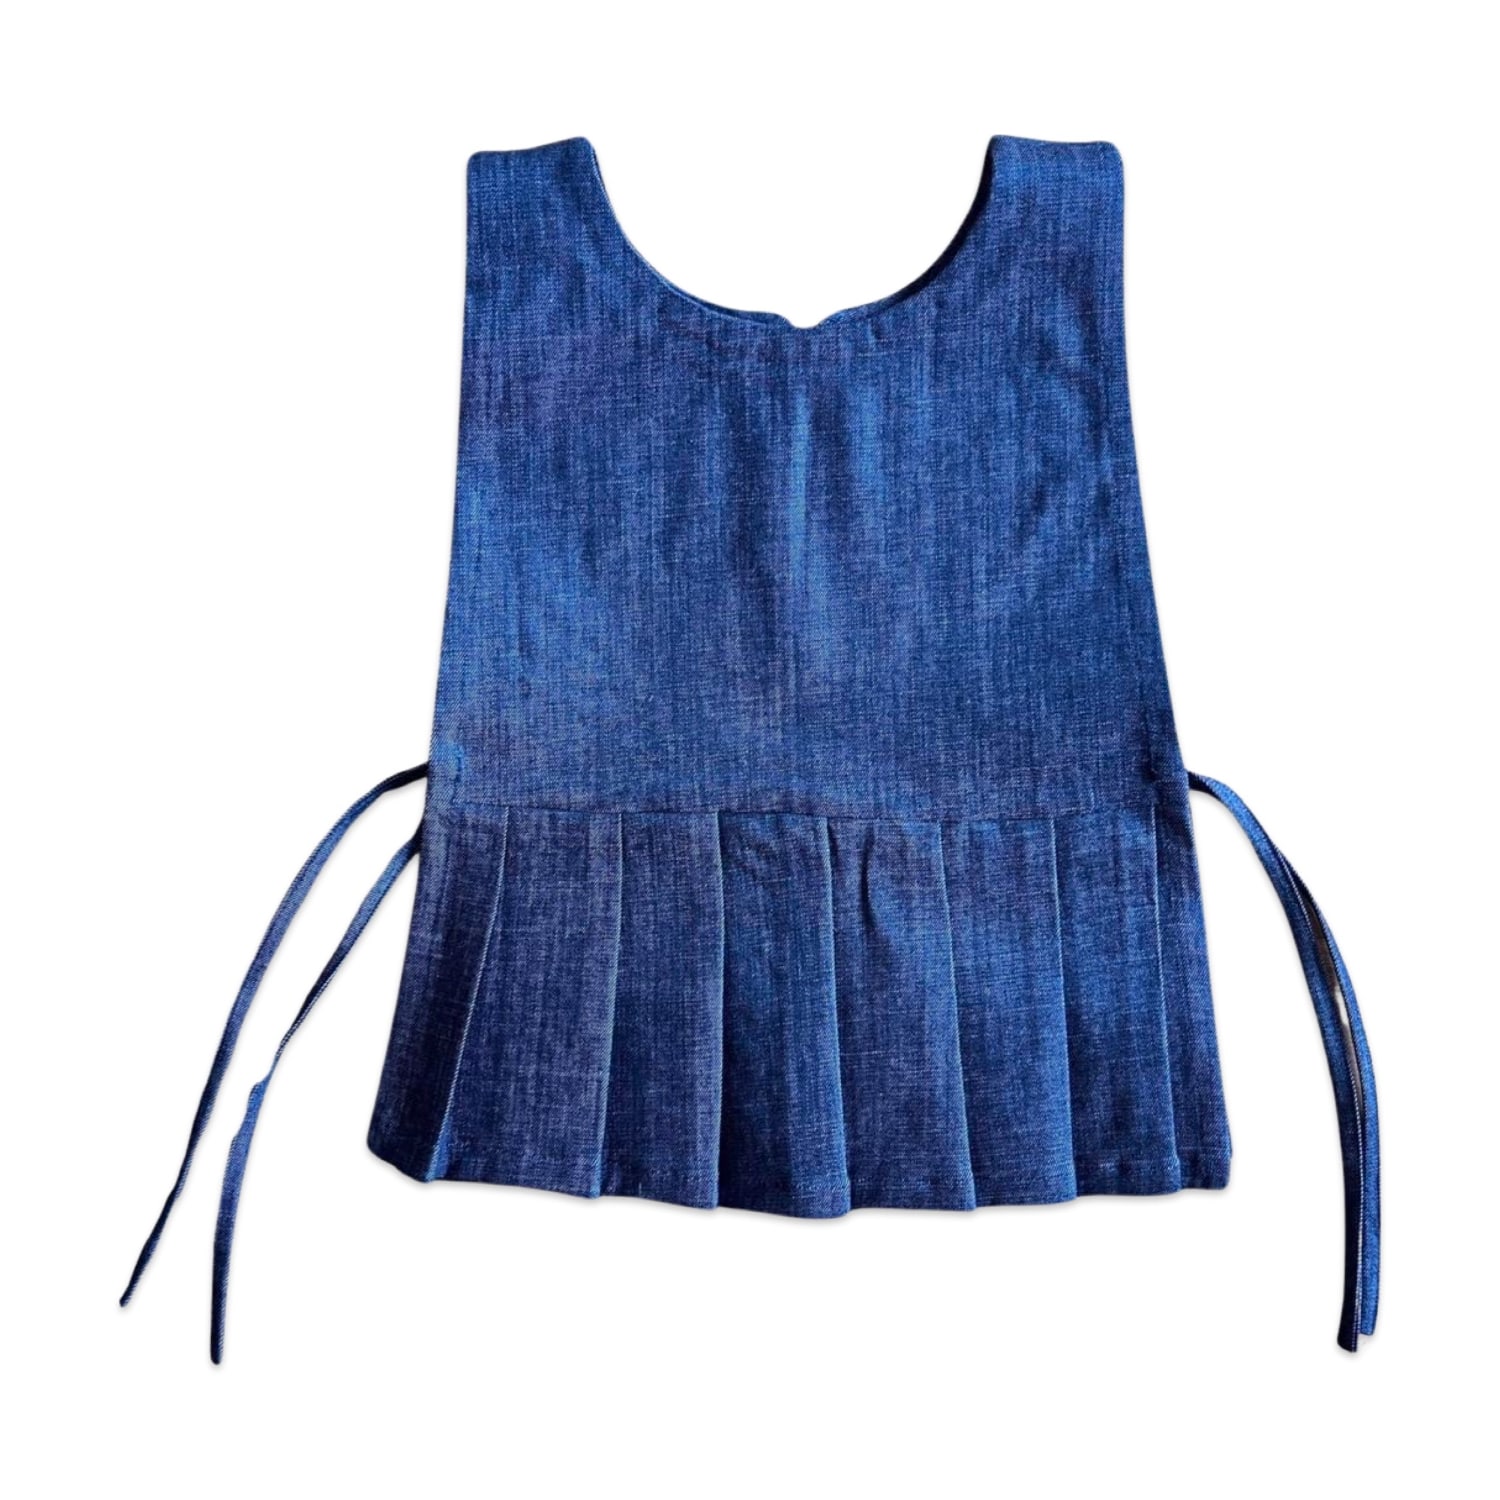 London Atelier Byproduct Women's Blue Denim Vest With Pleated Details & Open Sides